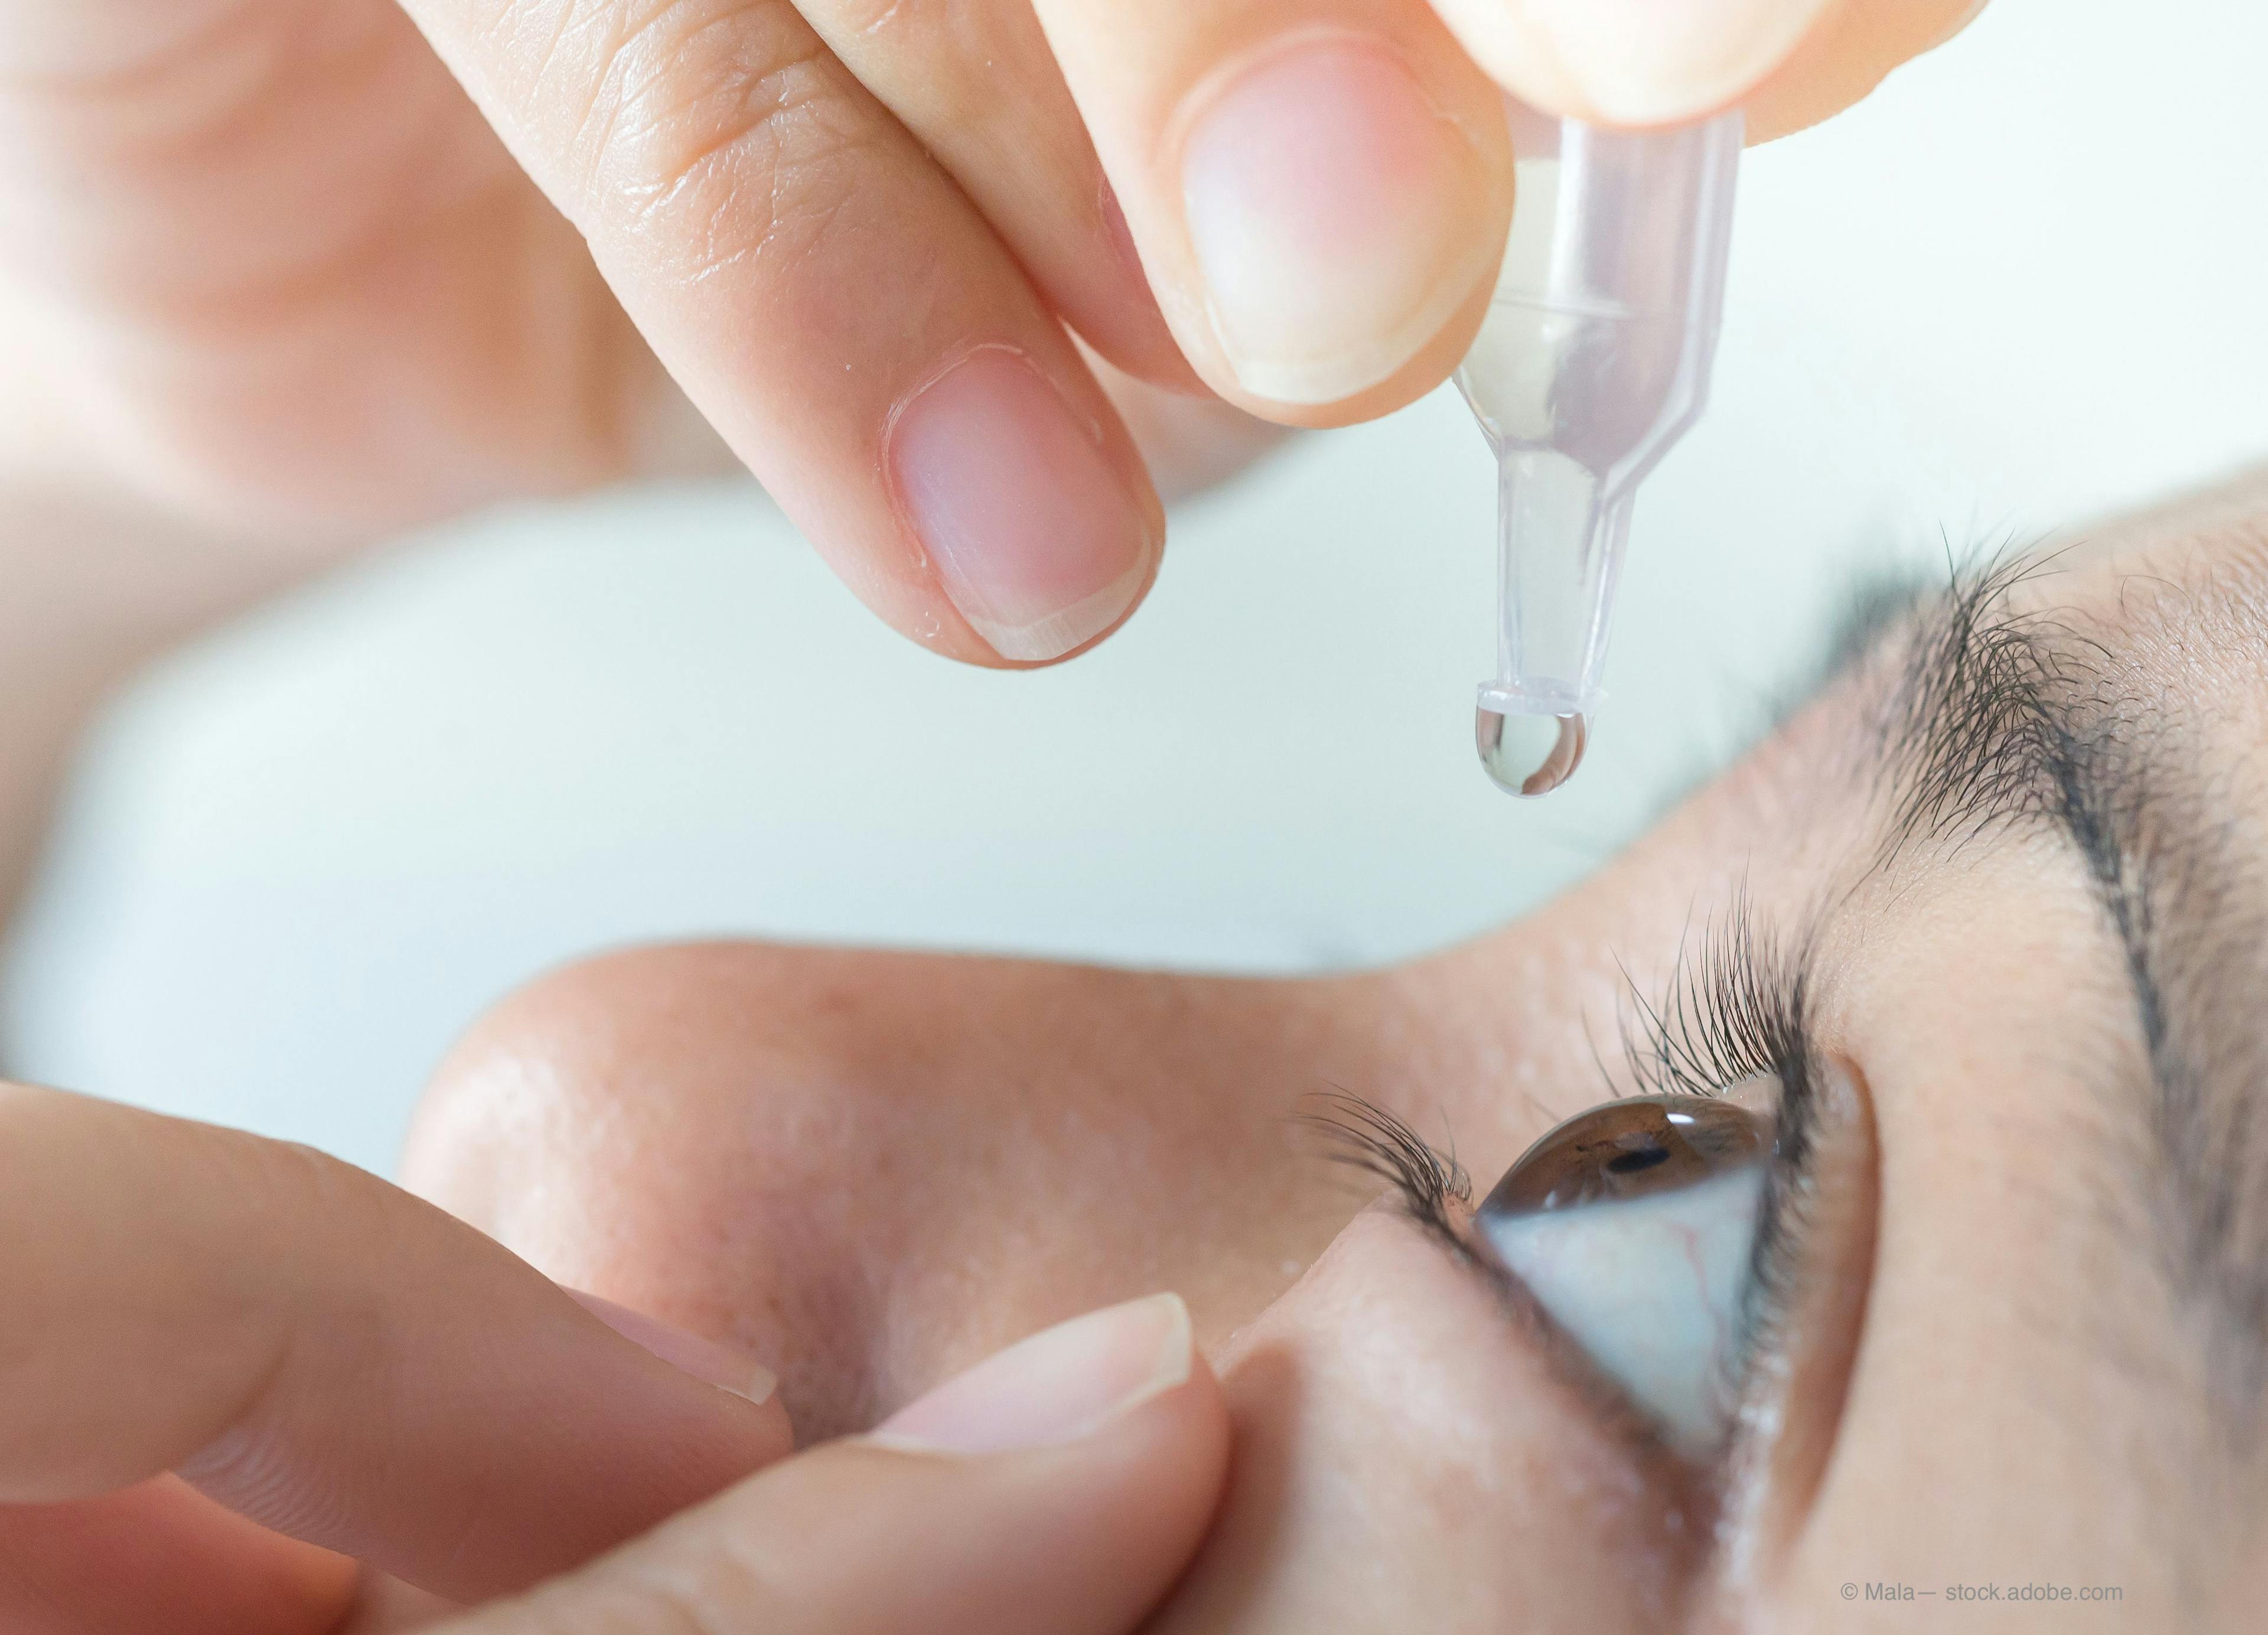  Aerie Pharmaceuticals announced Tuesday that the first participant has been dosed in the phase 3 registrational “COMET-2” study evaluating AR-15512 ophthalmic solution for the treatment of dry eye disease (DED).